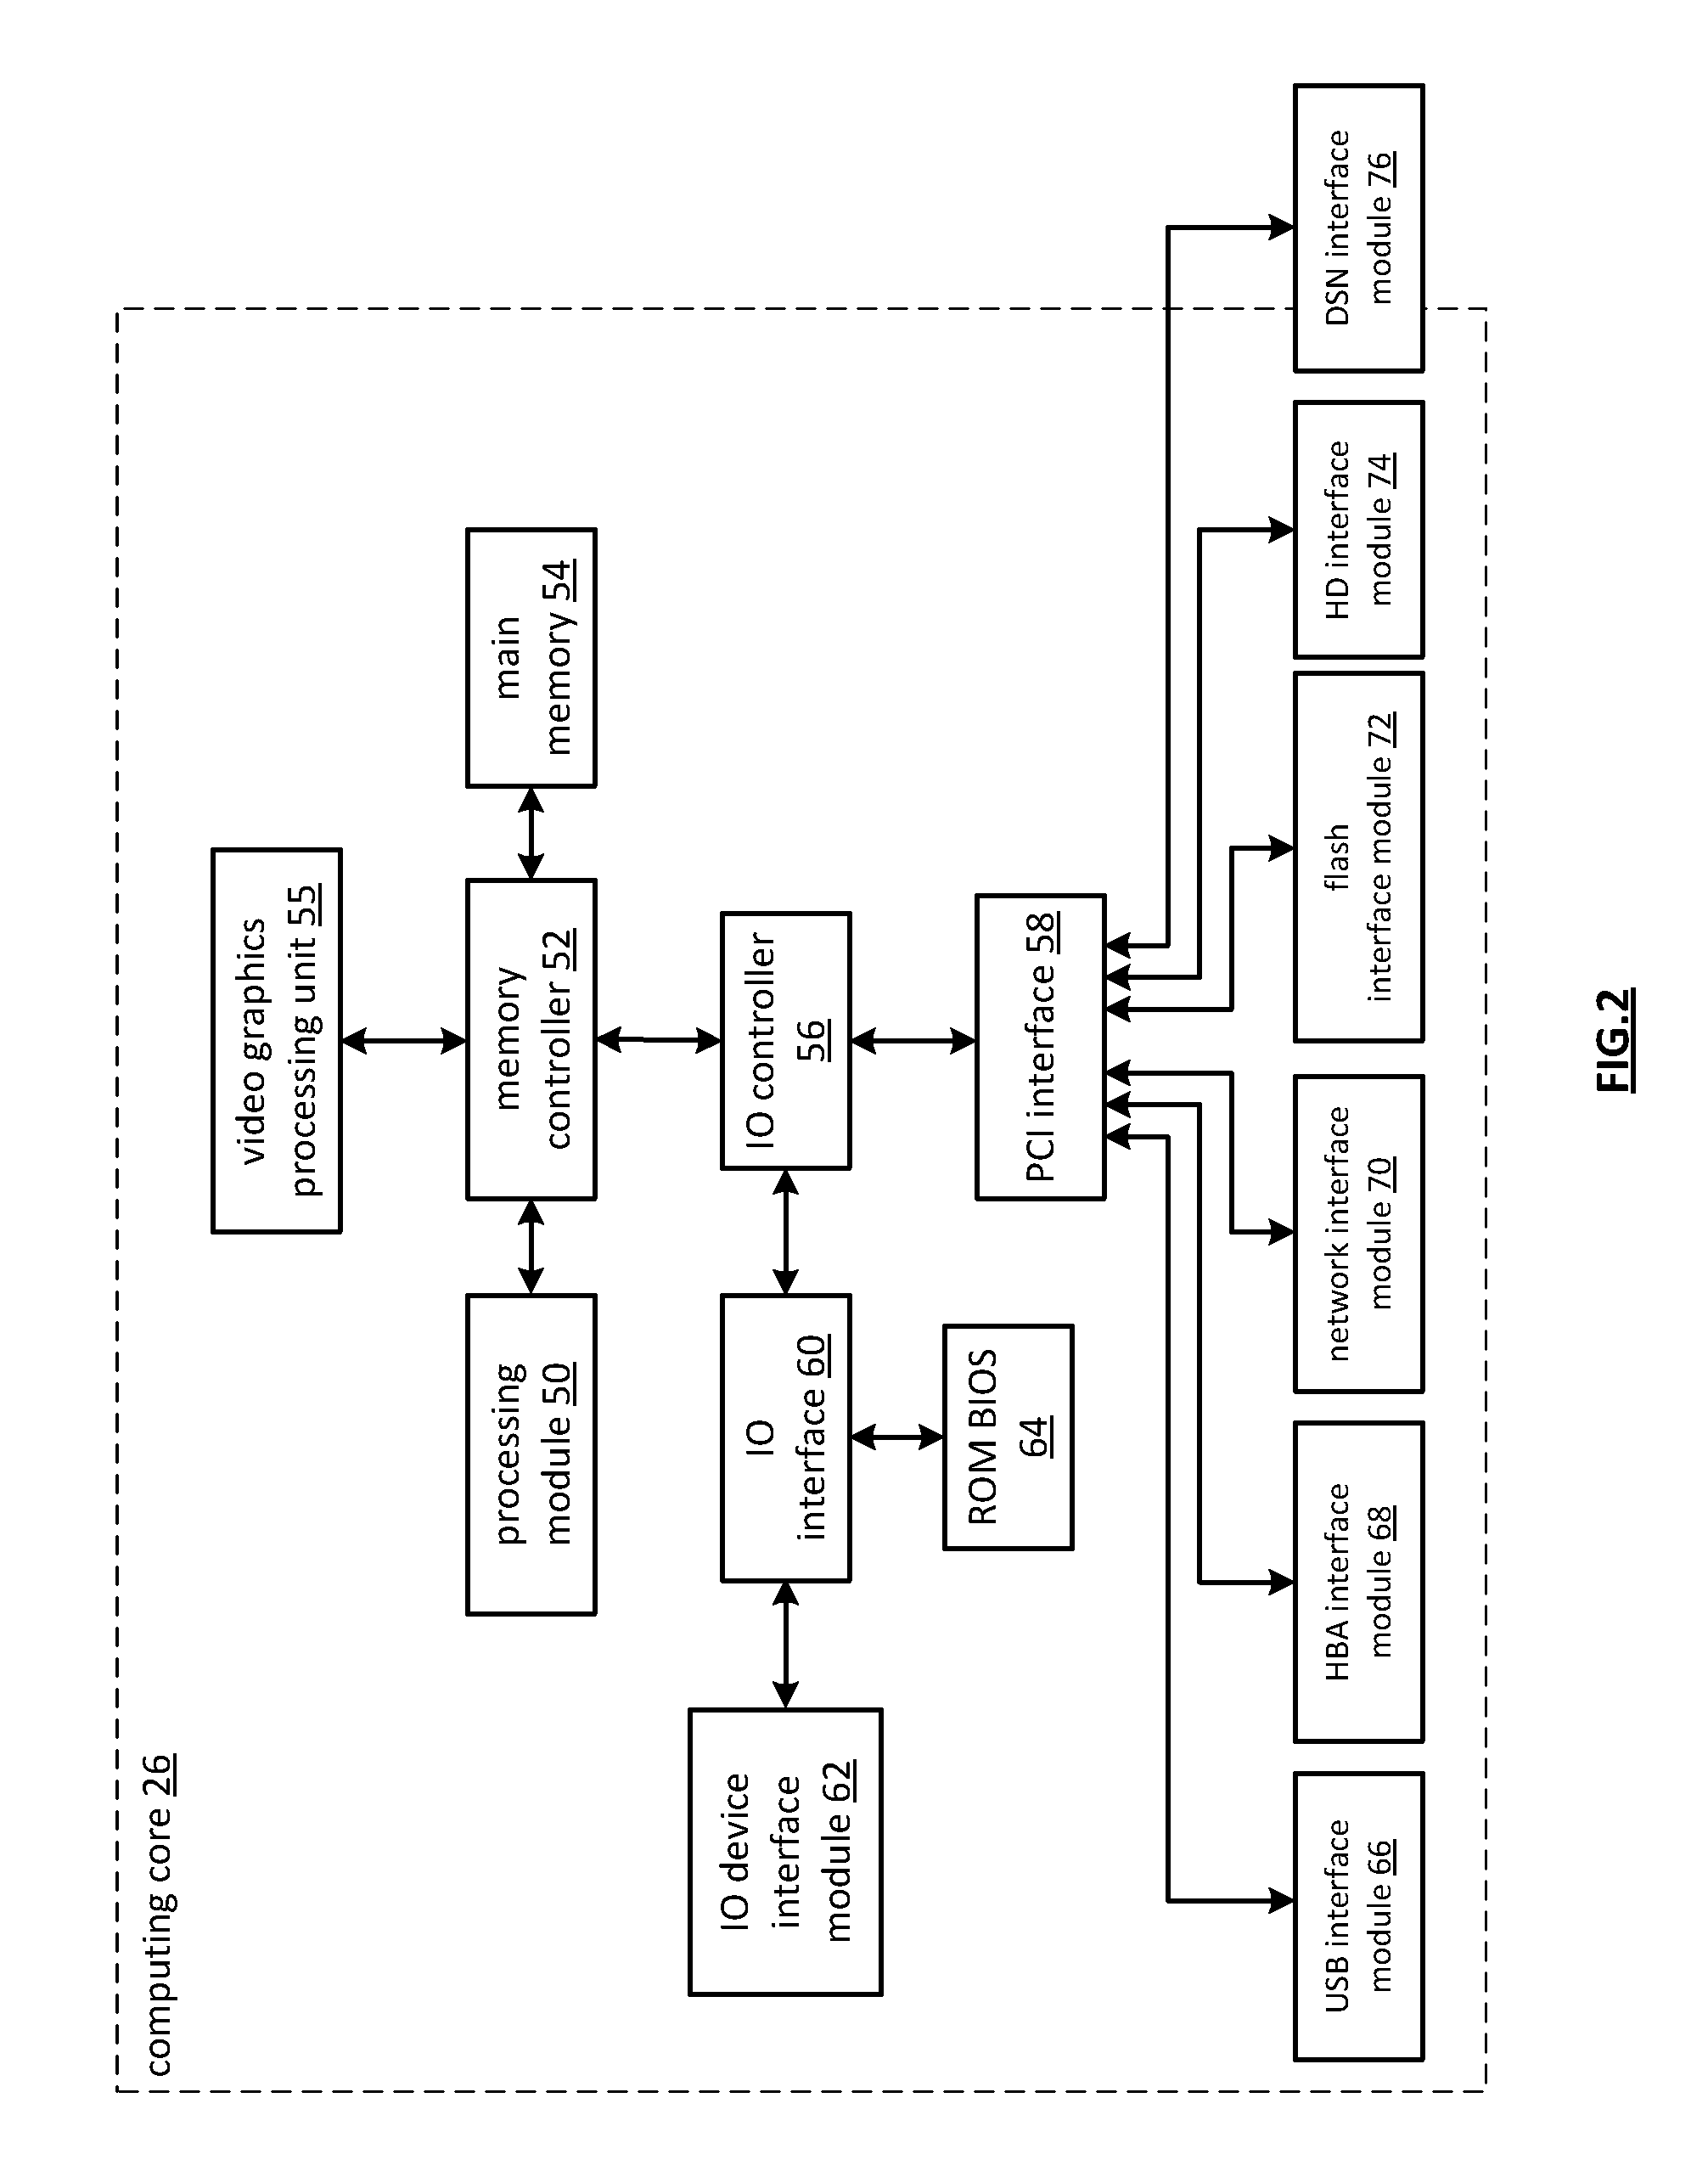 Dispersed storage camera device and method of operation